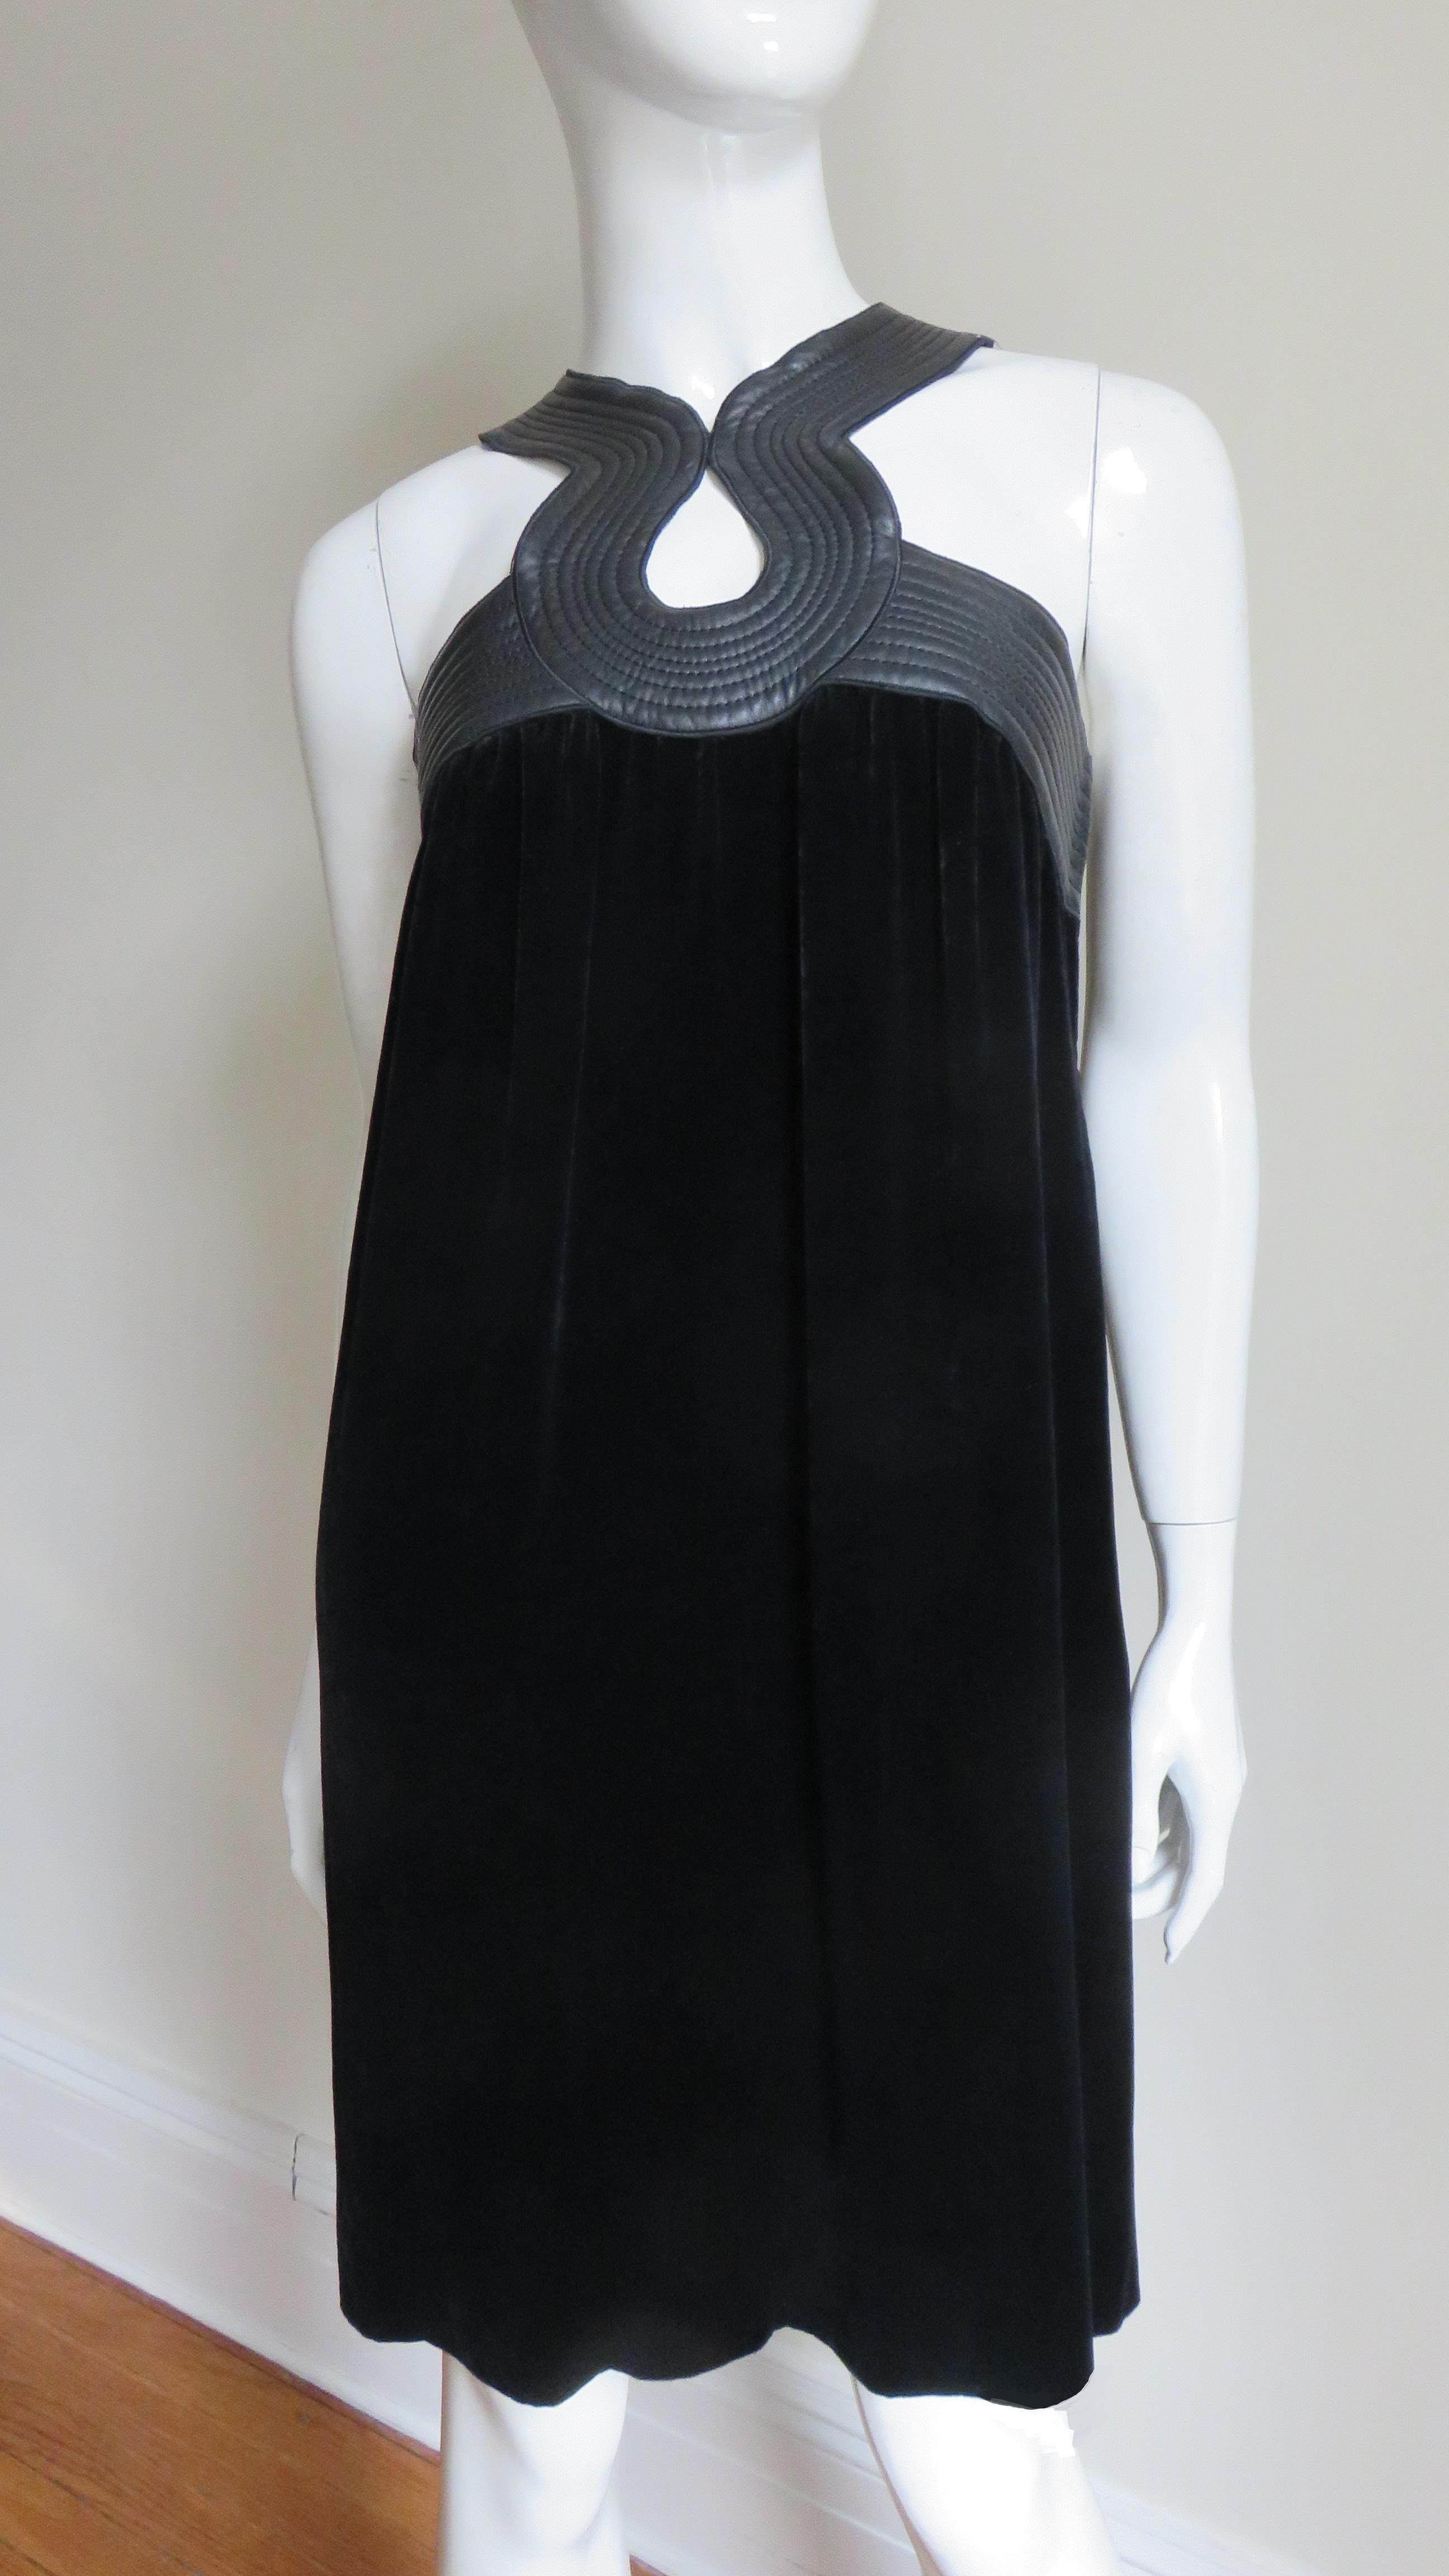 A fabulous black silk velvet dress from Jean Paul Gaultier.  It has incredible topstitched leather trim around top of the dress and neck creating tear drop shaped cut outs in the front and mid back.  It is unlined, closes with a side zipper and